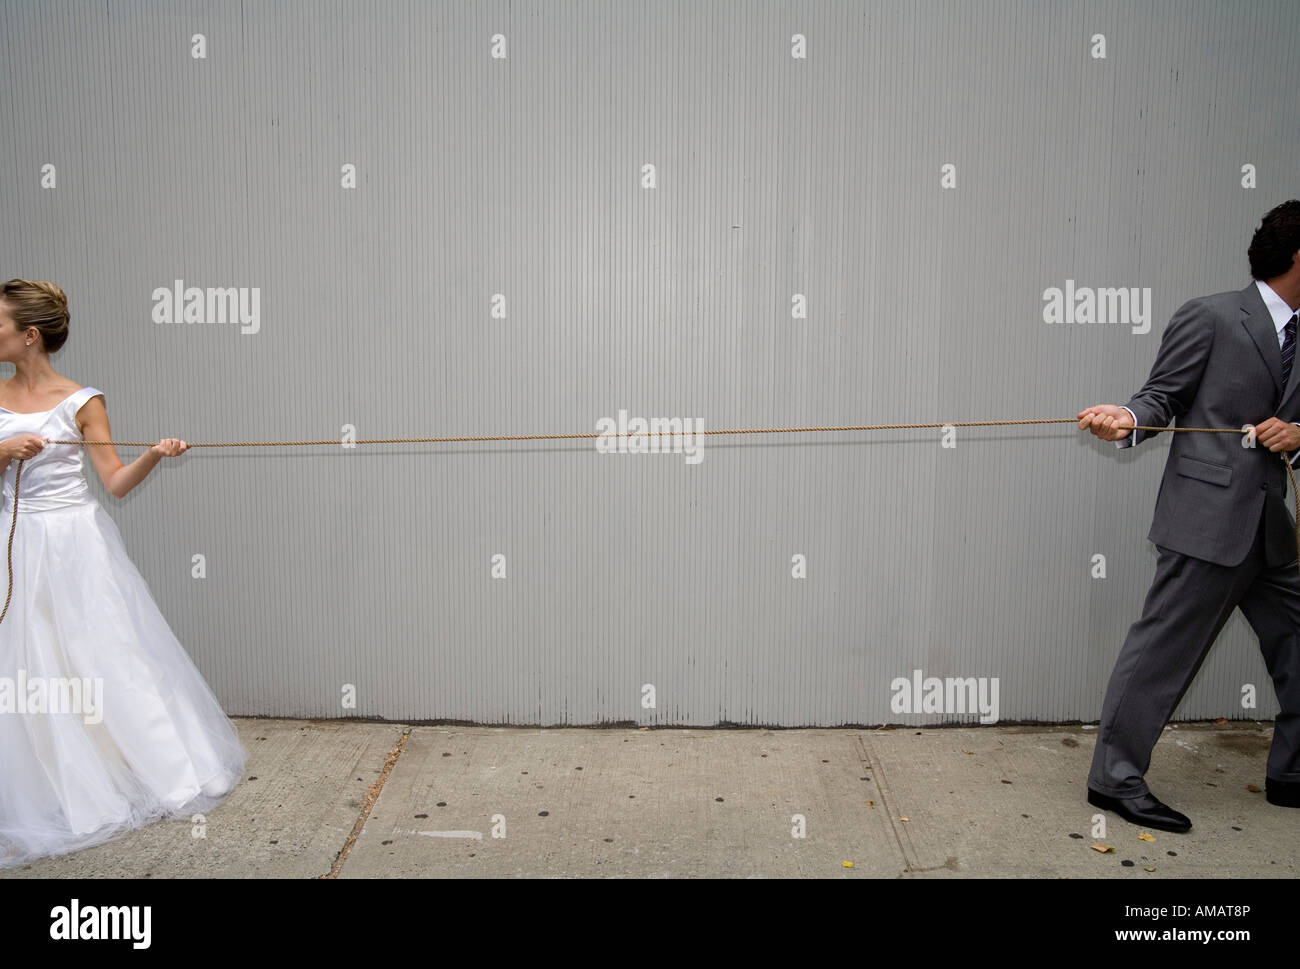 A bride and groom pulling a rope in different directions Stock Photo